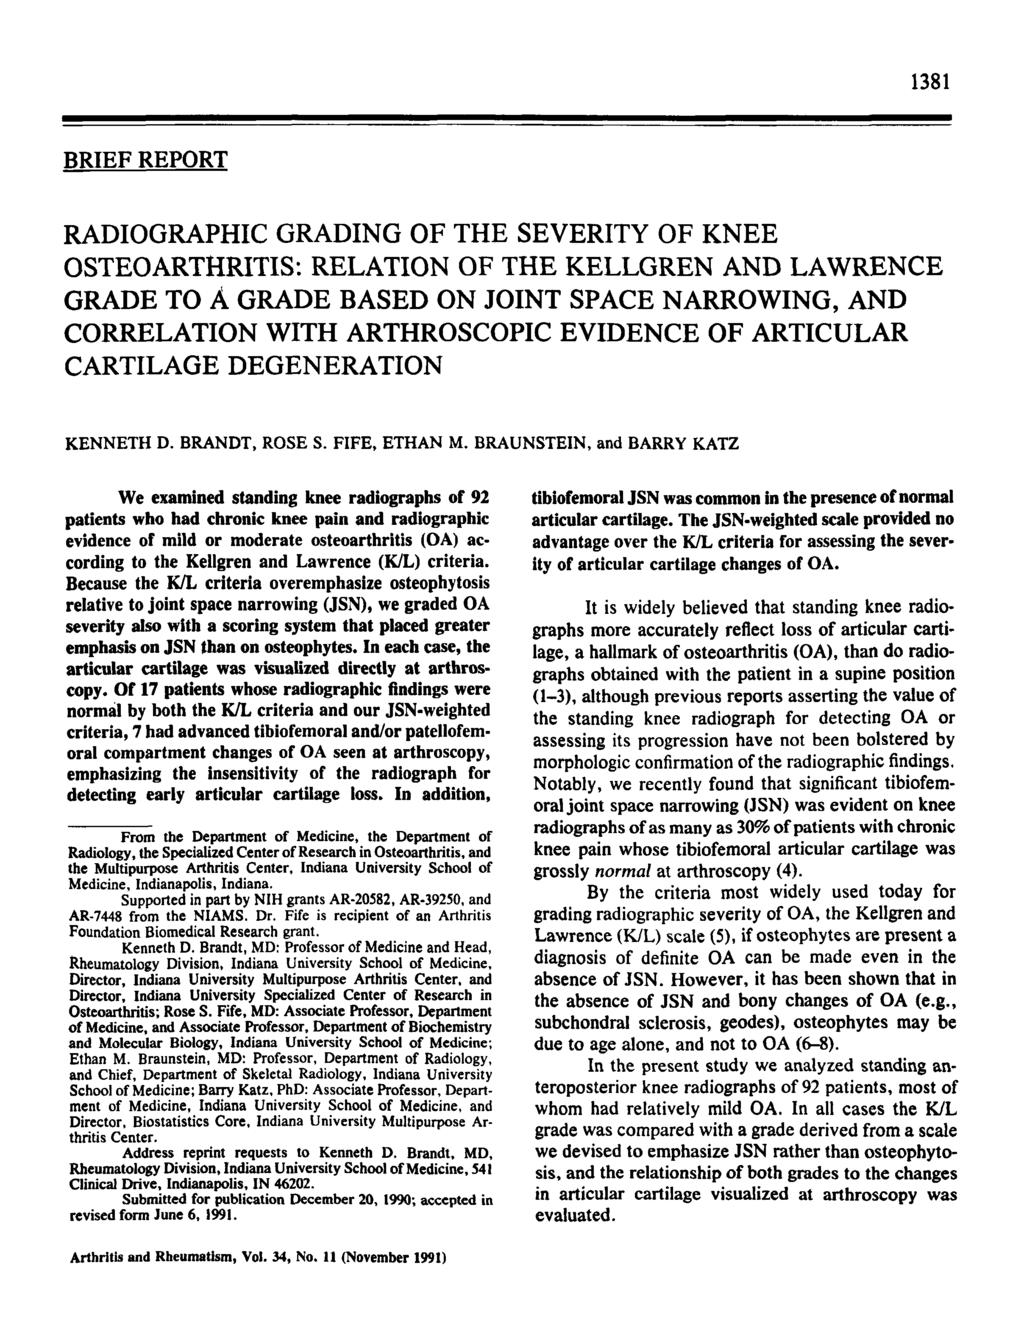 1381 BRIEF REPORT RADIOGRAPHIC GRADING OF THE SEVERITY OF KNEE OSTEOARTHRITIS: RELATION OF THE KELLGREN AND LAWRENCE GRADE TO A GRADE BASED ON JOINT SPACE NARROWING, AND CORRELATION WITH ARTHROSCOPIC